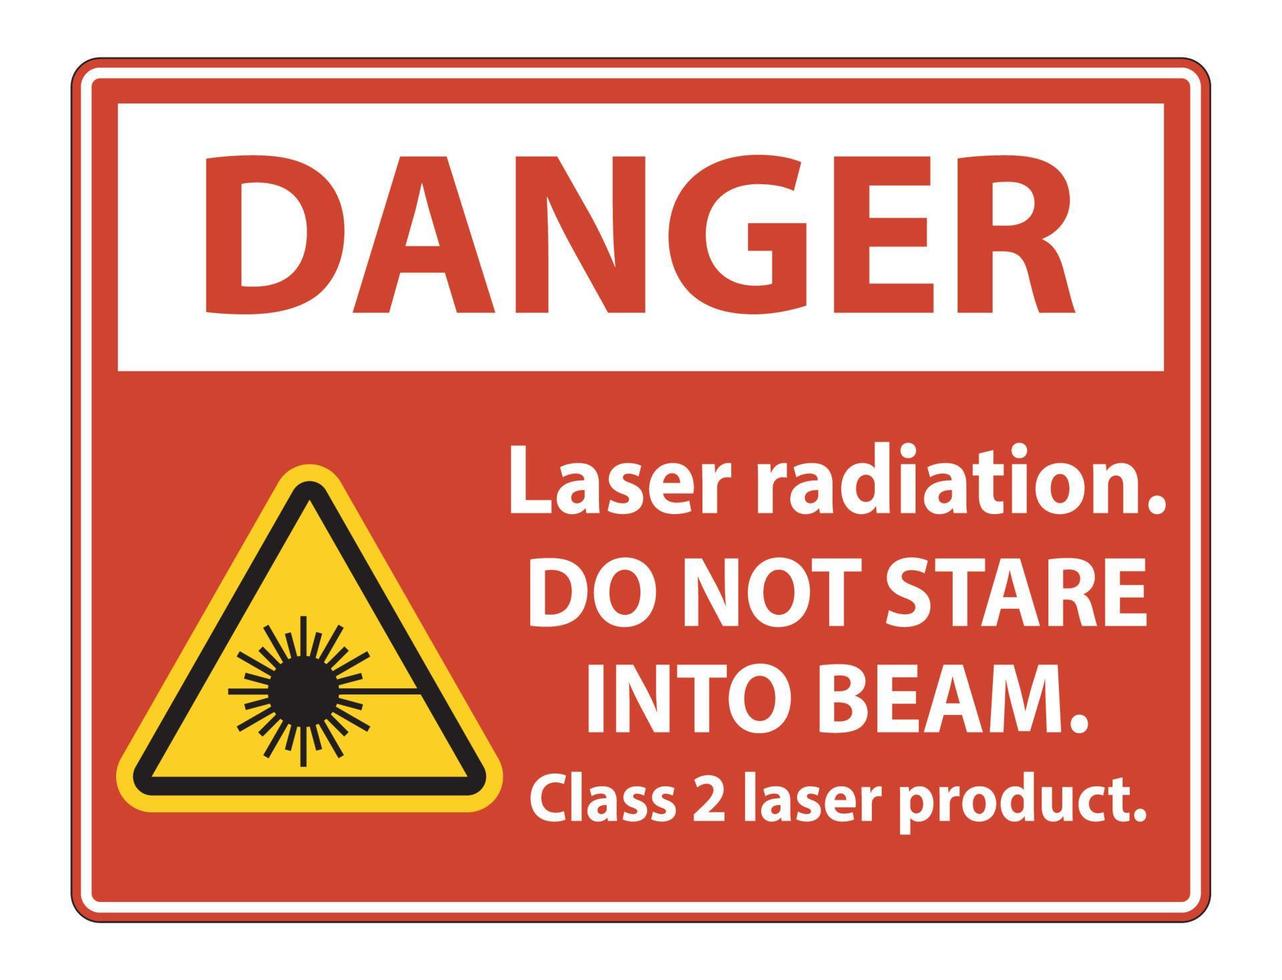 Danger Laser radiation,do not stare into beam,class 2 laser product Sign on white background vector